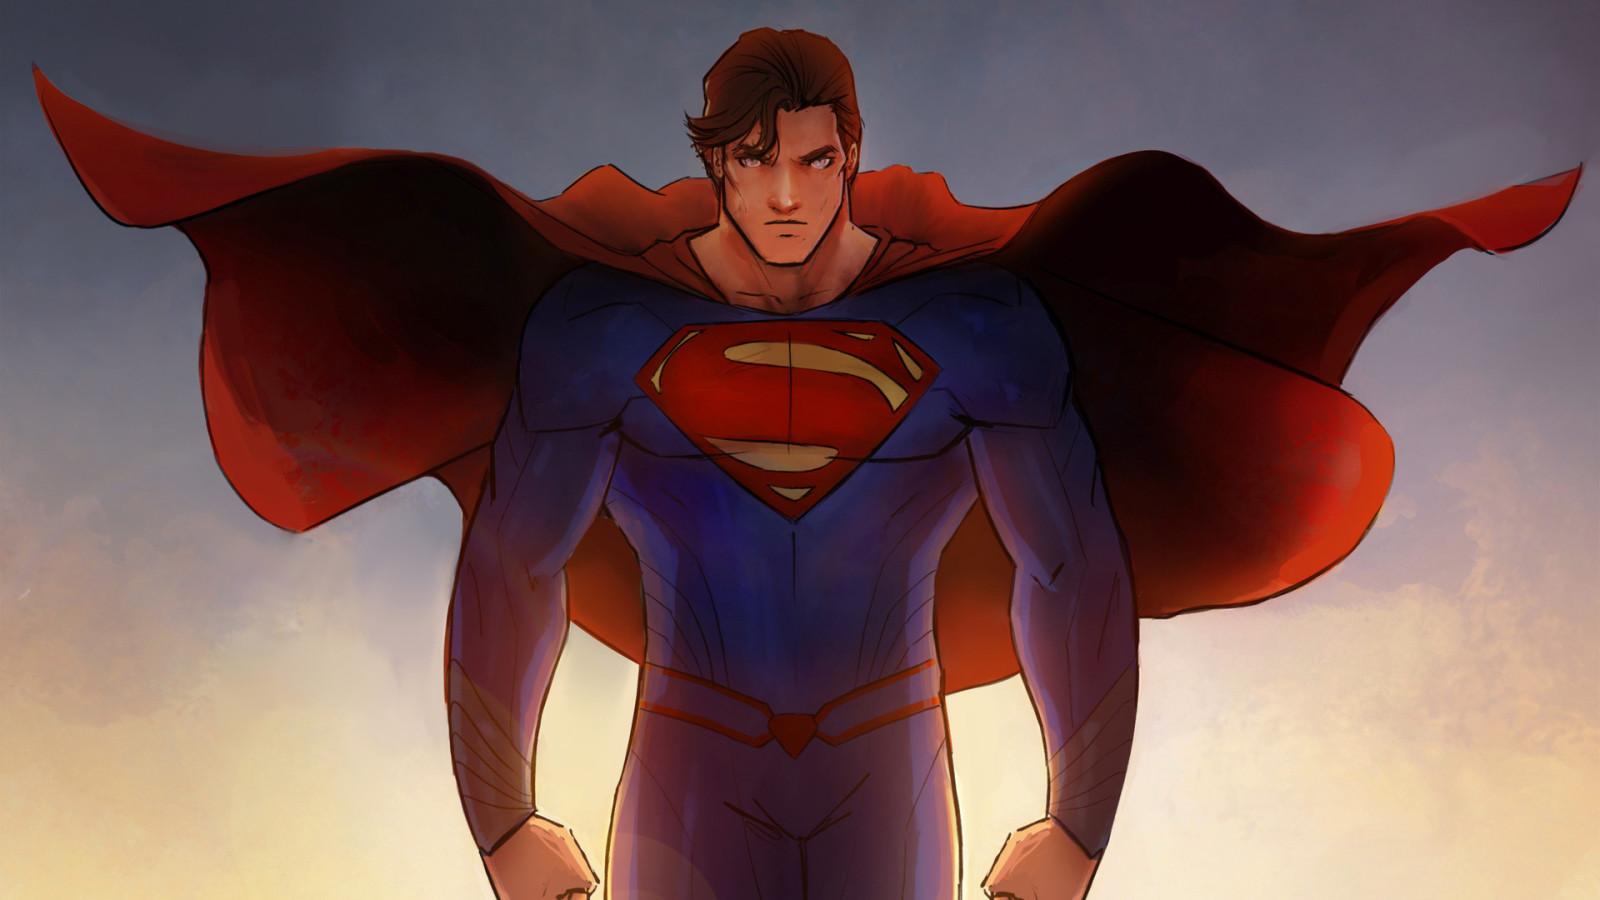 My Adventures With Superman: 'My Adventures With Superman' anime gets  release date: Here's all you need to know - The Economic Times